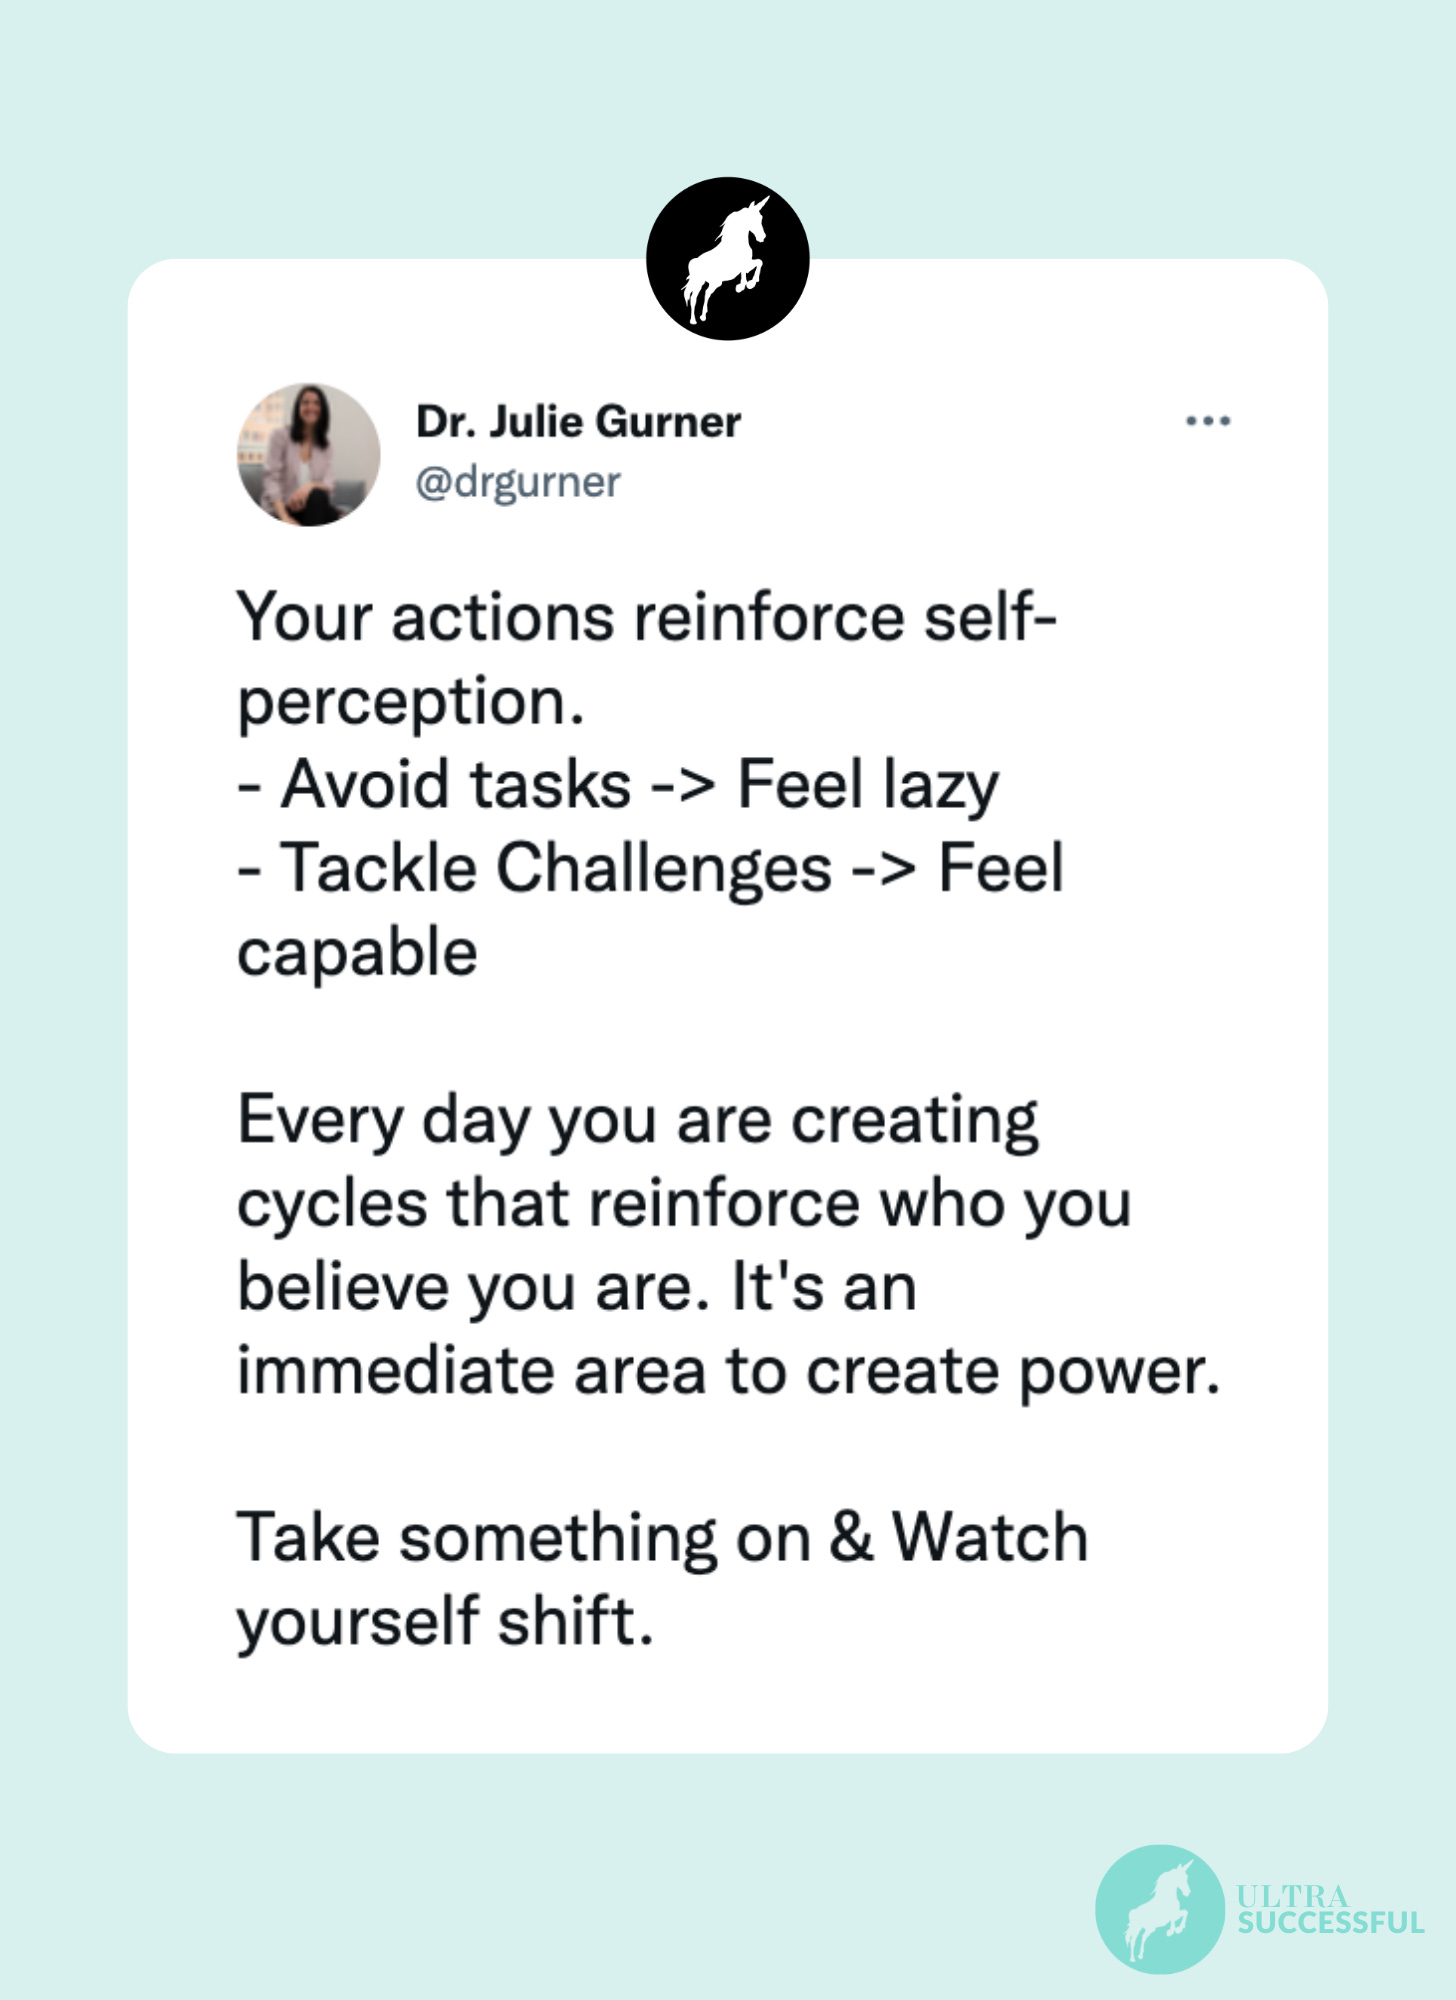 @drgurner: Your actions reinforce self-perception.  - Avoid tasks -> Feel lazy - Tackle Challenges -> Feel capable  Every day you are creating cycles that reinforce who you believe you are. It's an immediate area to create power.  Take something on & Watch yourself shift.